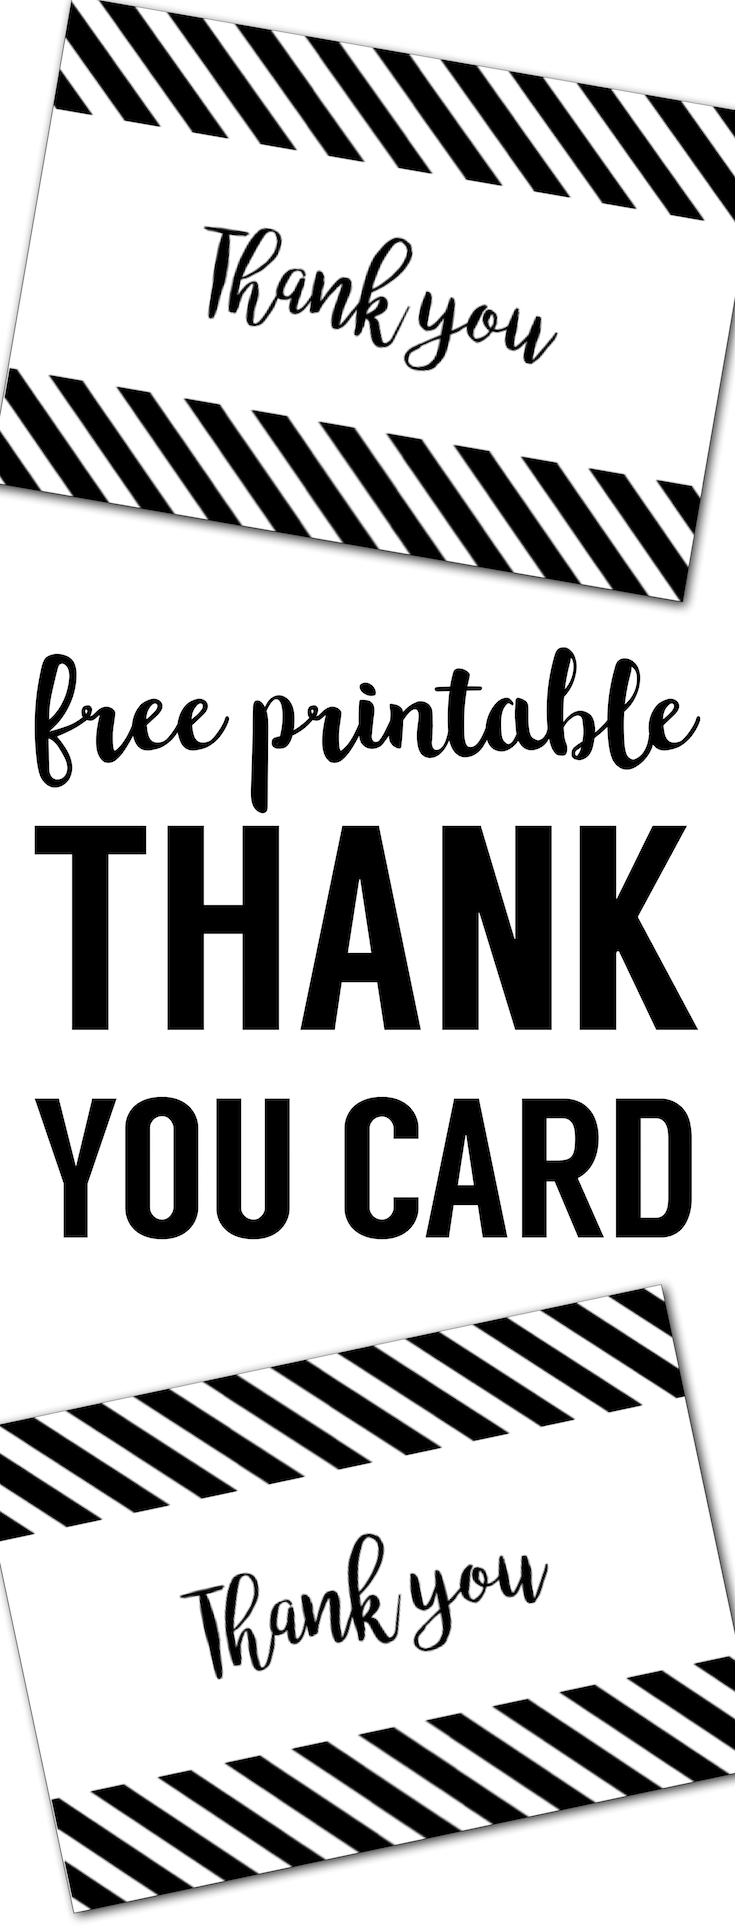 free-thank-you-cards-print-free-printable-black-and-white-thank-you-card-paper-trail-design